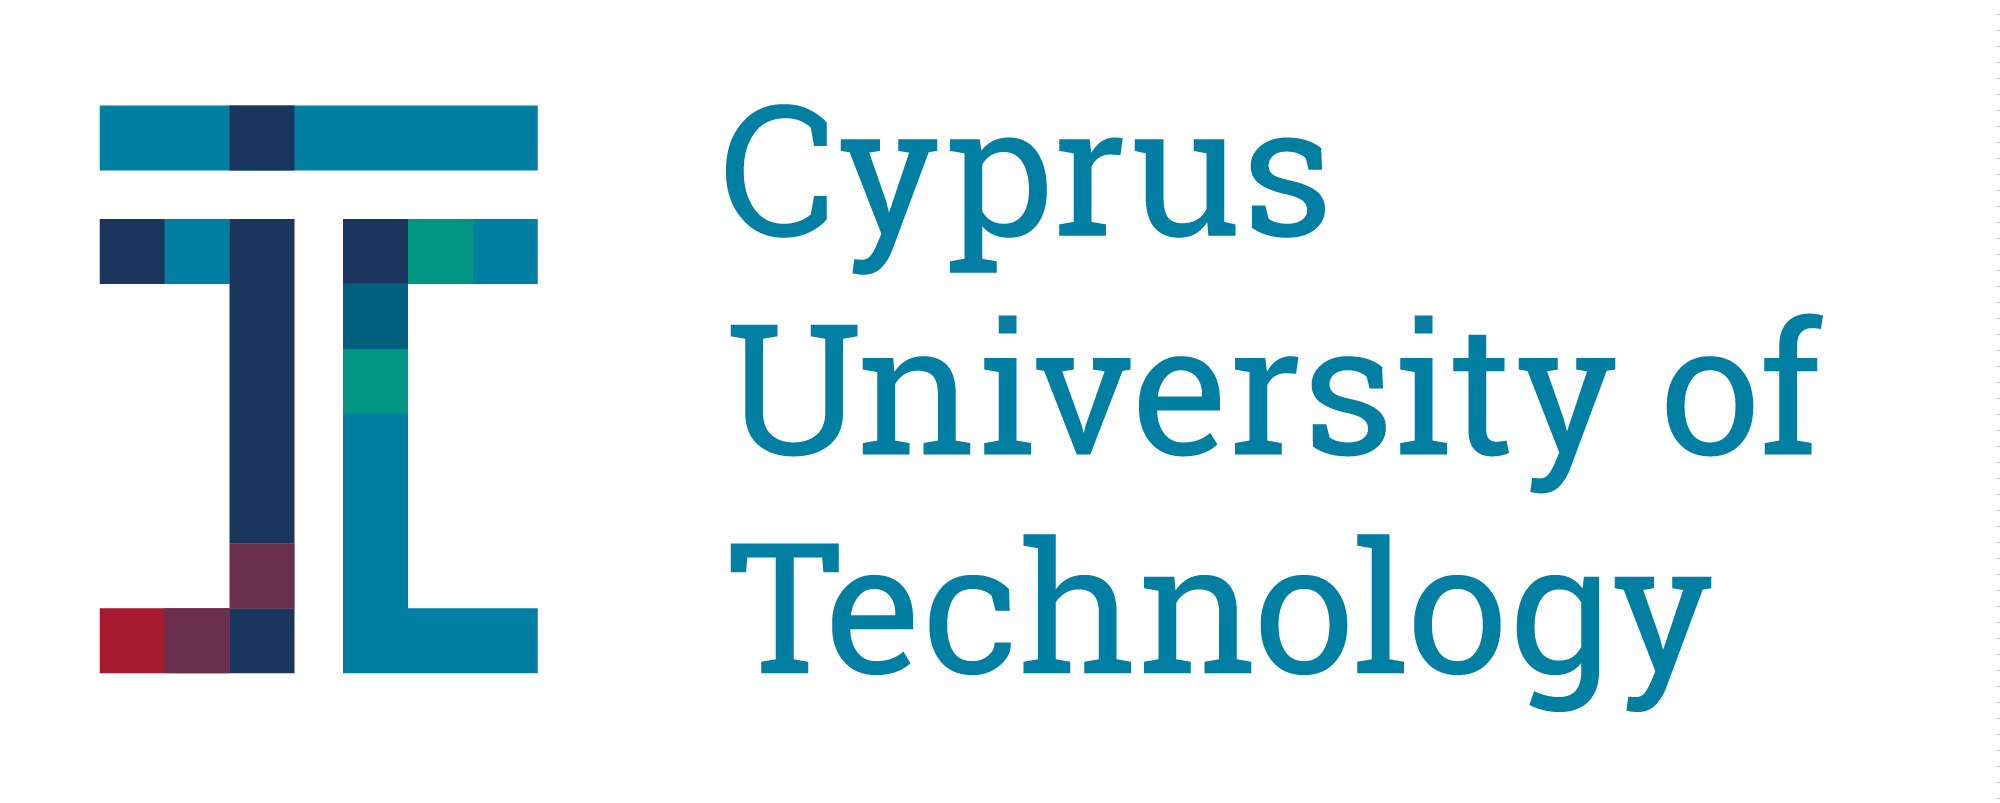 Cyprus University of Technology official logo